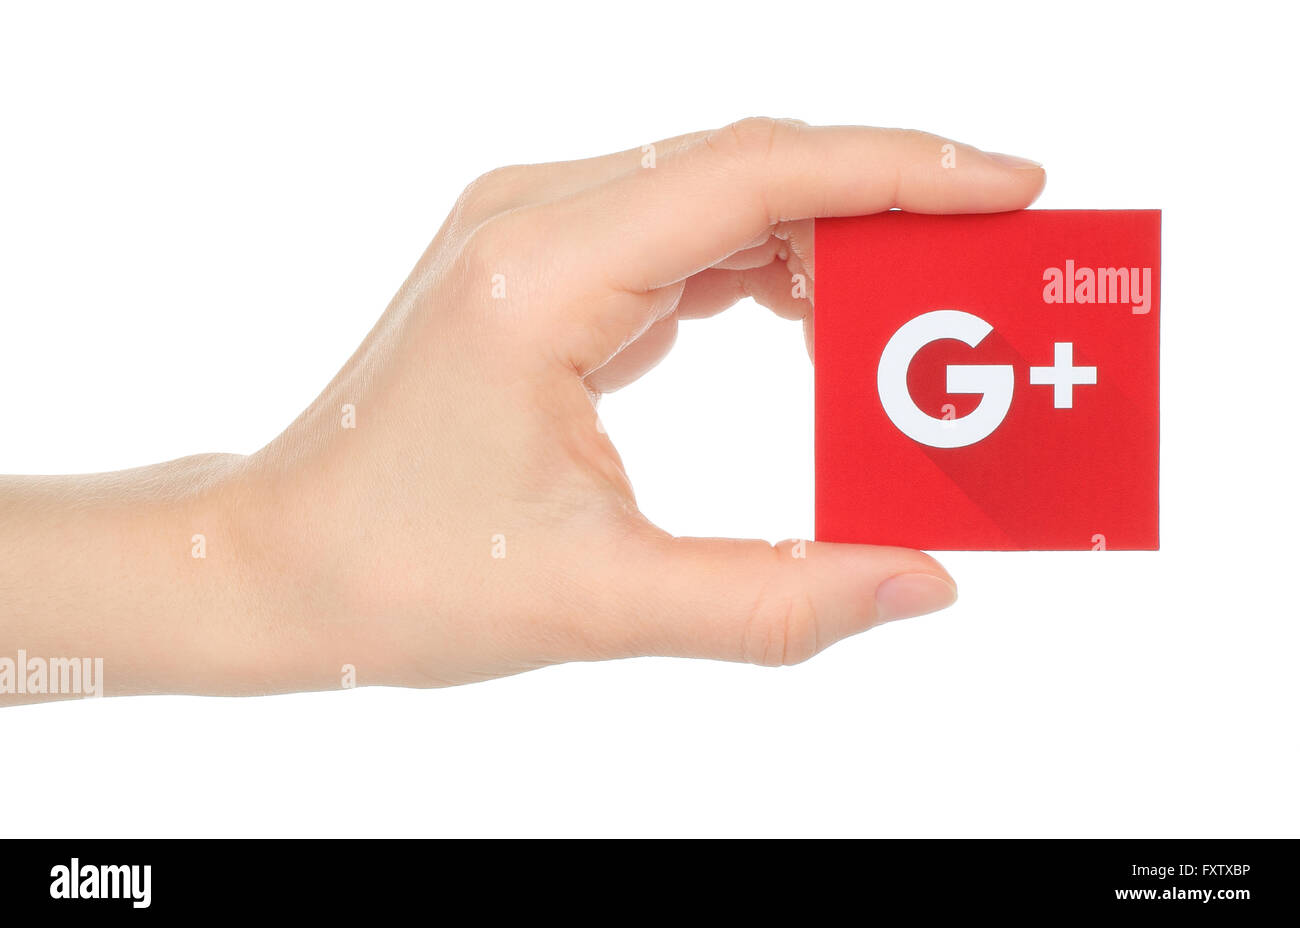 Kiev, Ukraine - January 15, 2016:Hand holds new Google plus logotype printed on paper and cut, on white background.Google is USA Stock Photo